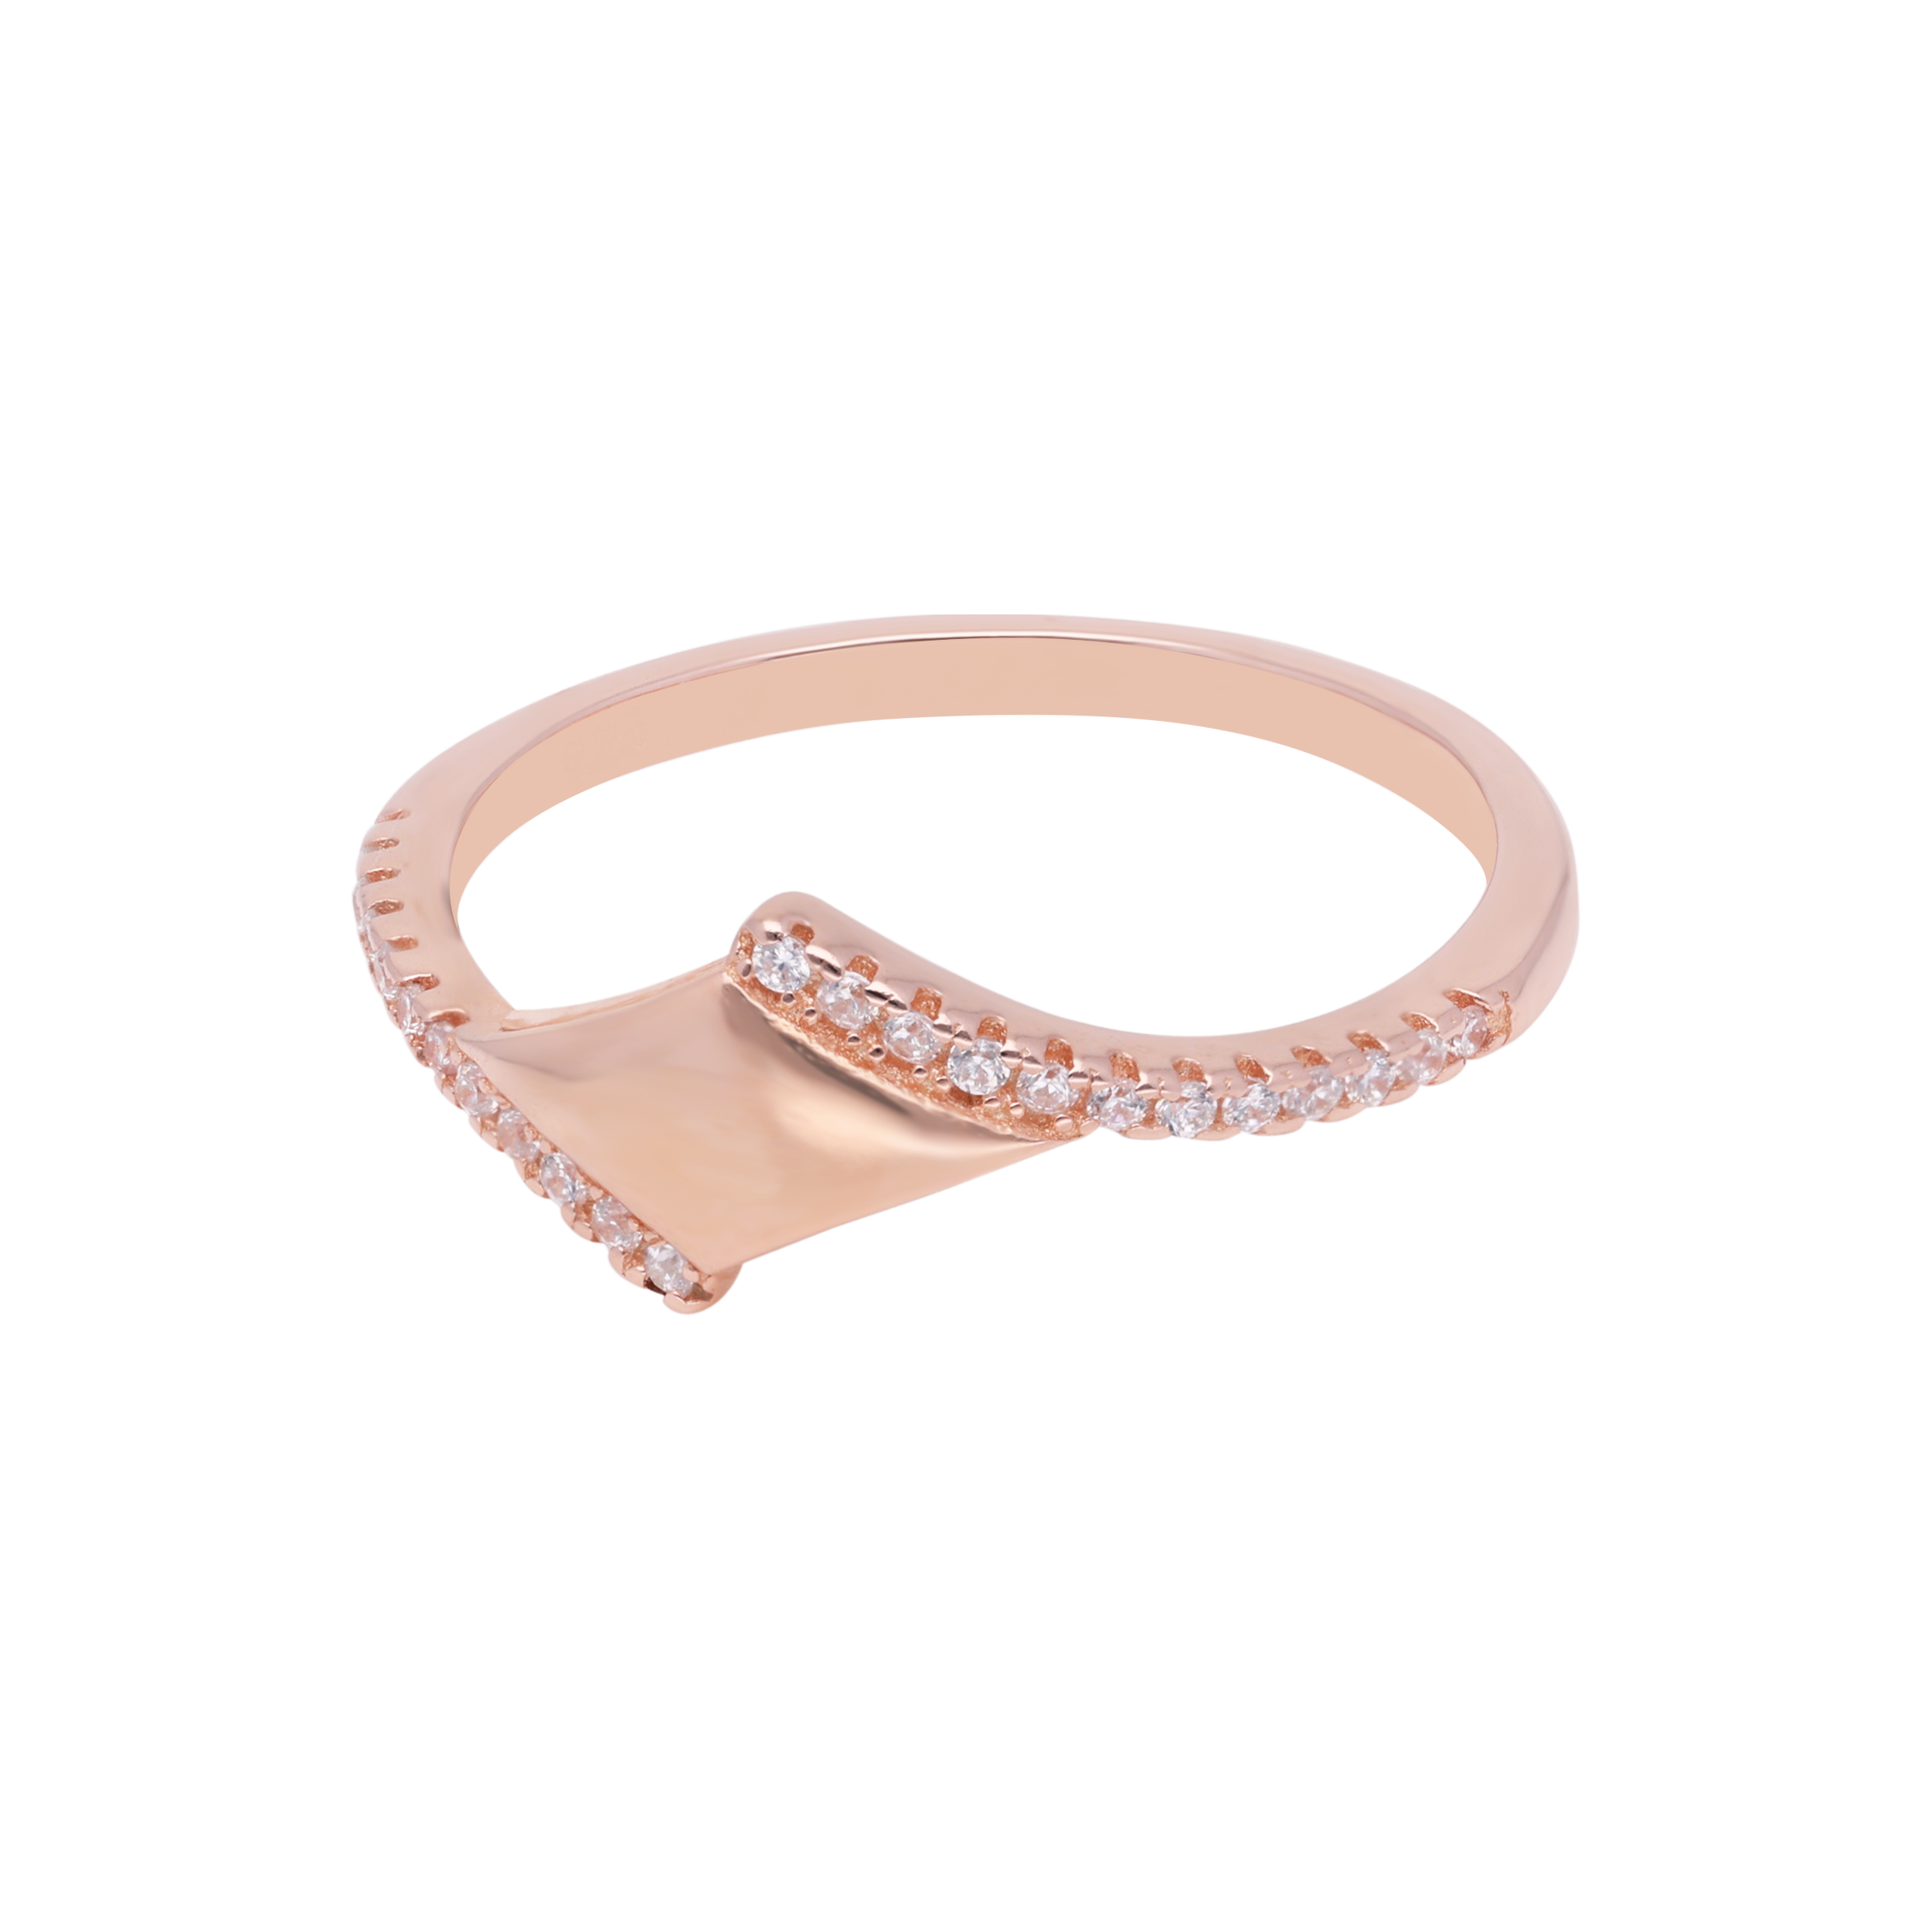 Rosé Radiance: Sterling Silver Band Ring with Rose Gold Accents | SKU : 0019799247, 0019799292, 0019799315, 0019799285, 0019799254, 0019799230, 0019799308, 0019799278, 0019799315, 0019799261